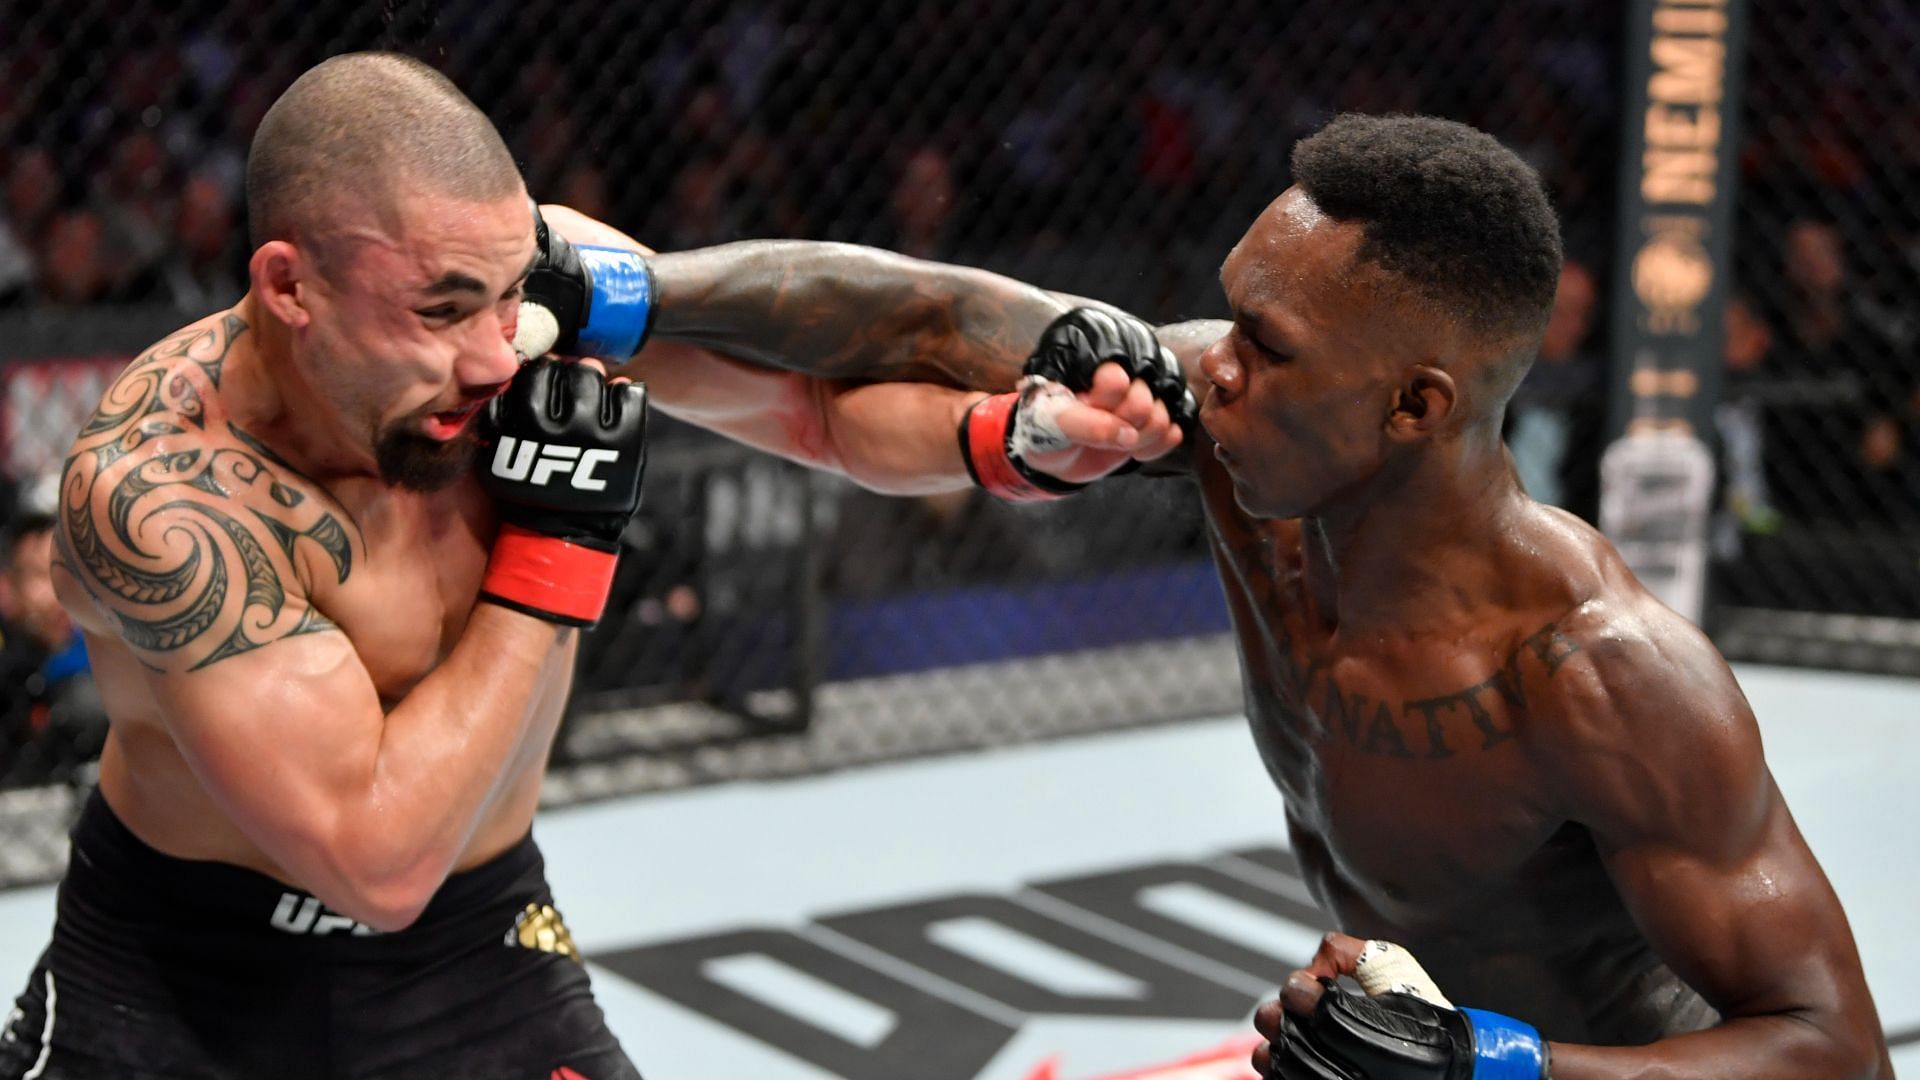 Robert Whittaker made the error of attempting to rush in against Israel Adesanya in their first meeting